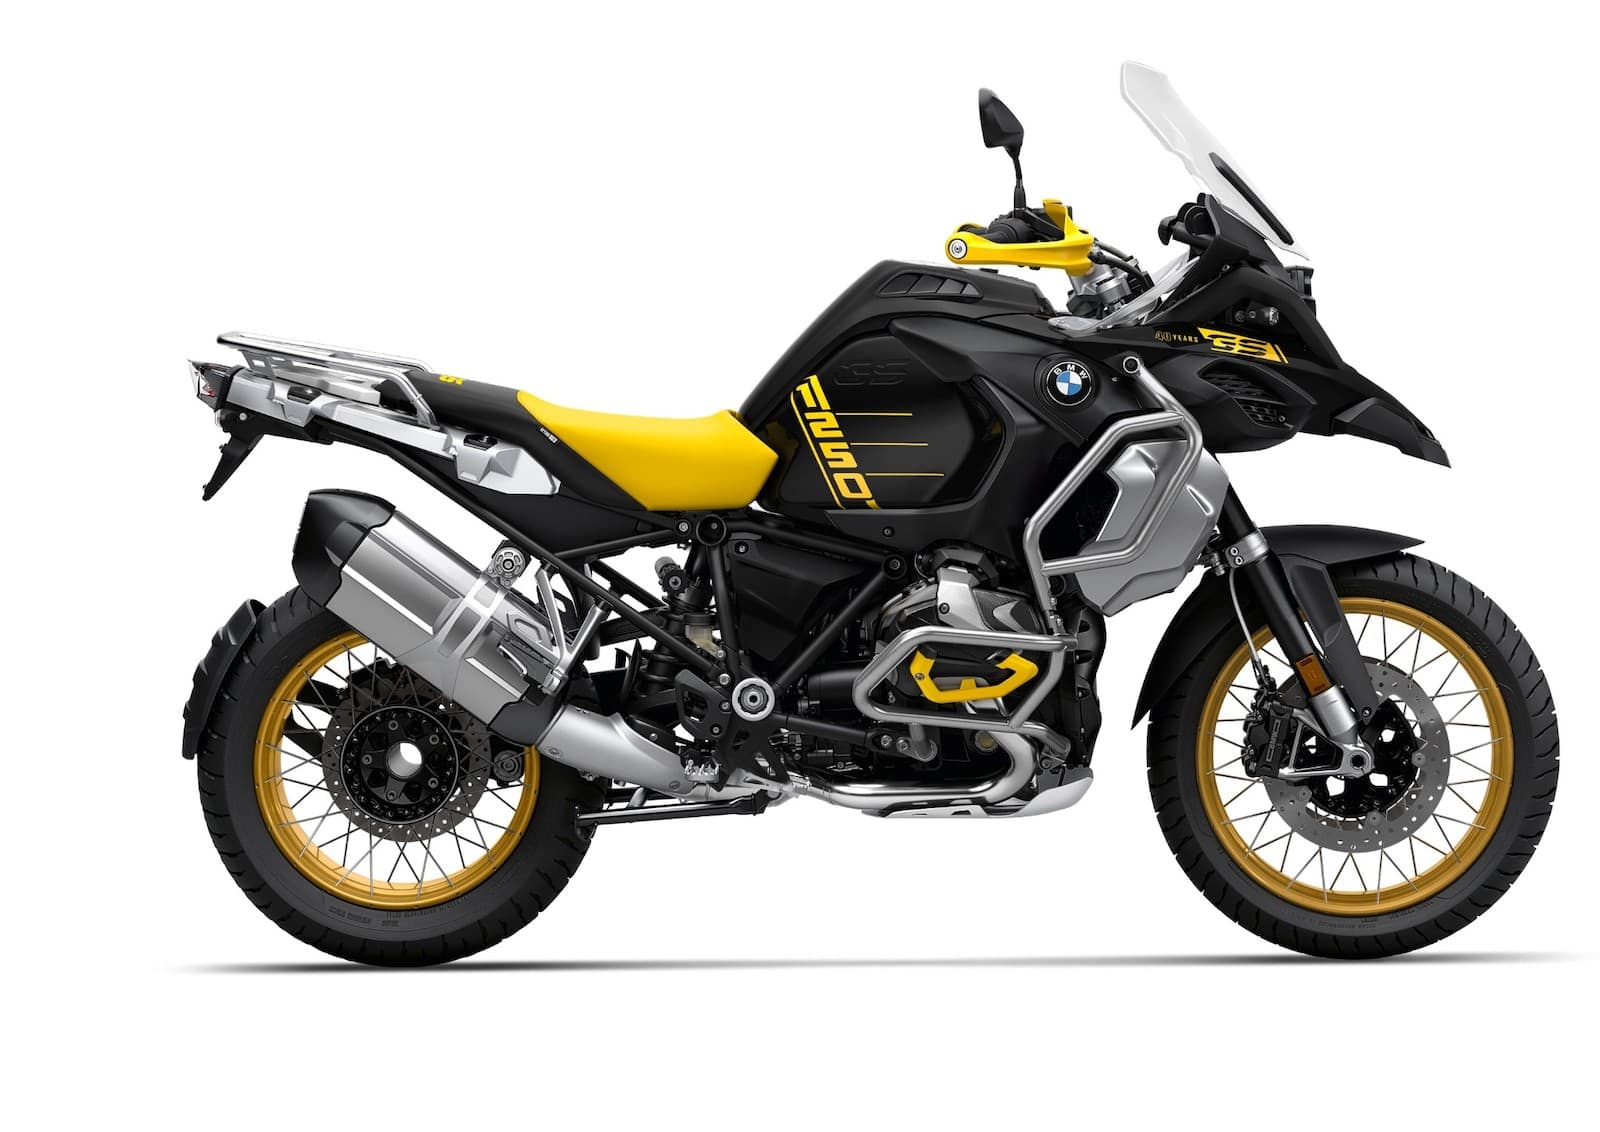 BMW R 1250 GS Adventure LHS yellow and black